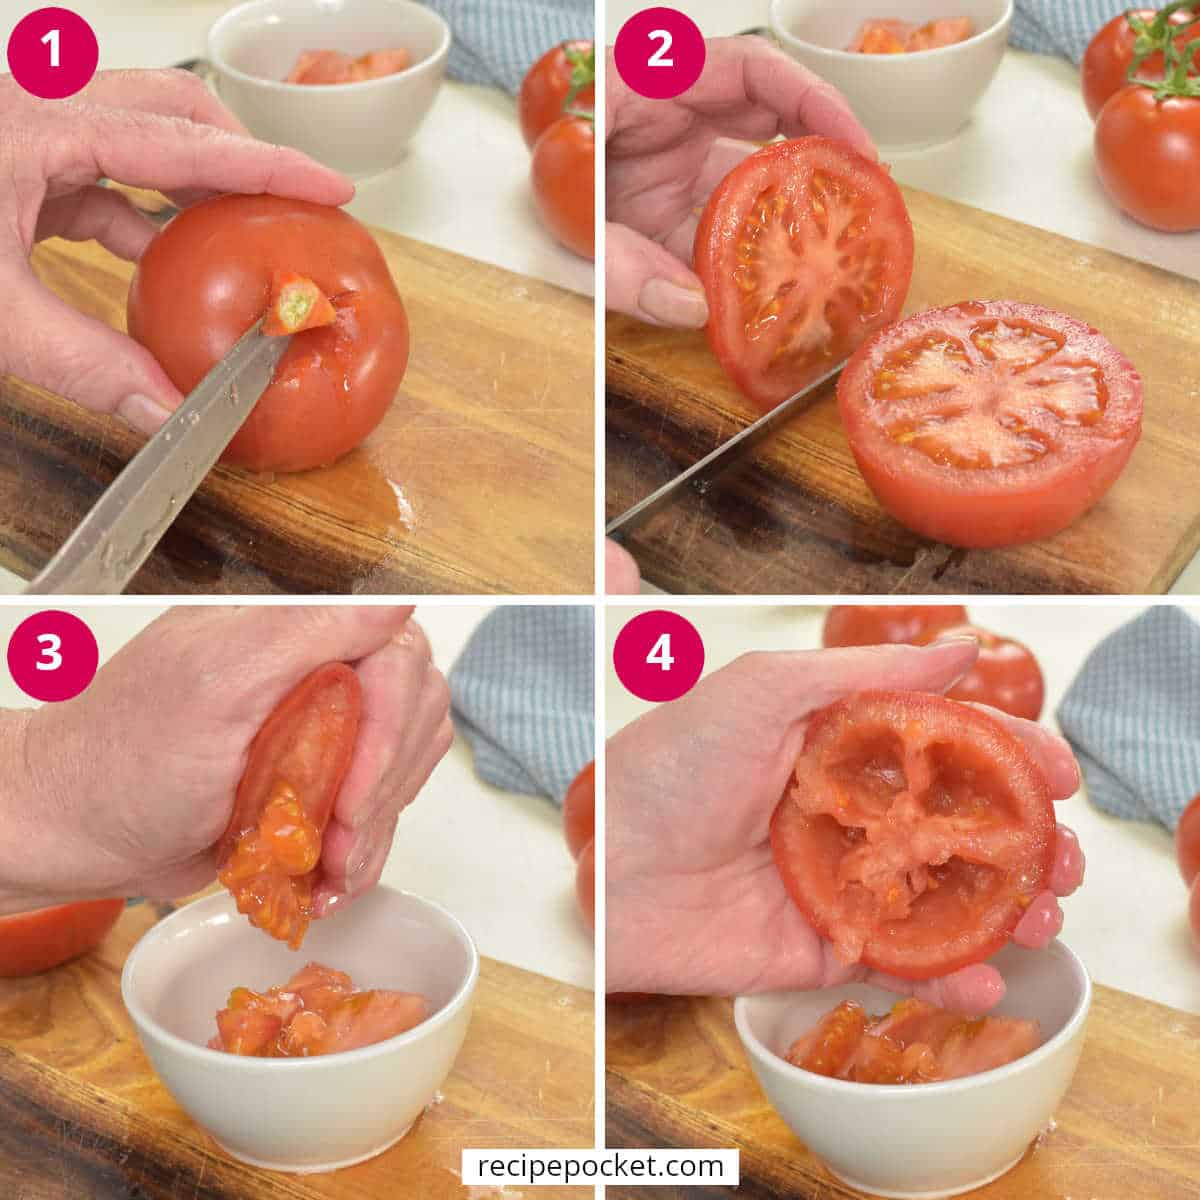 Four part image showing how to deseed a tomato by squeezing.